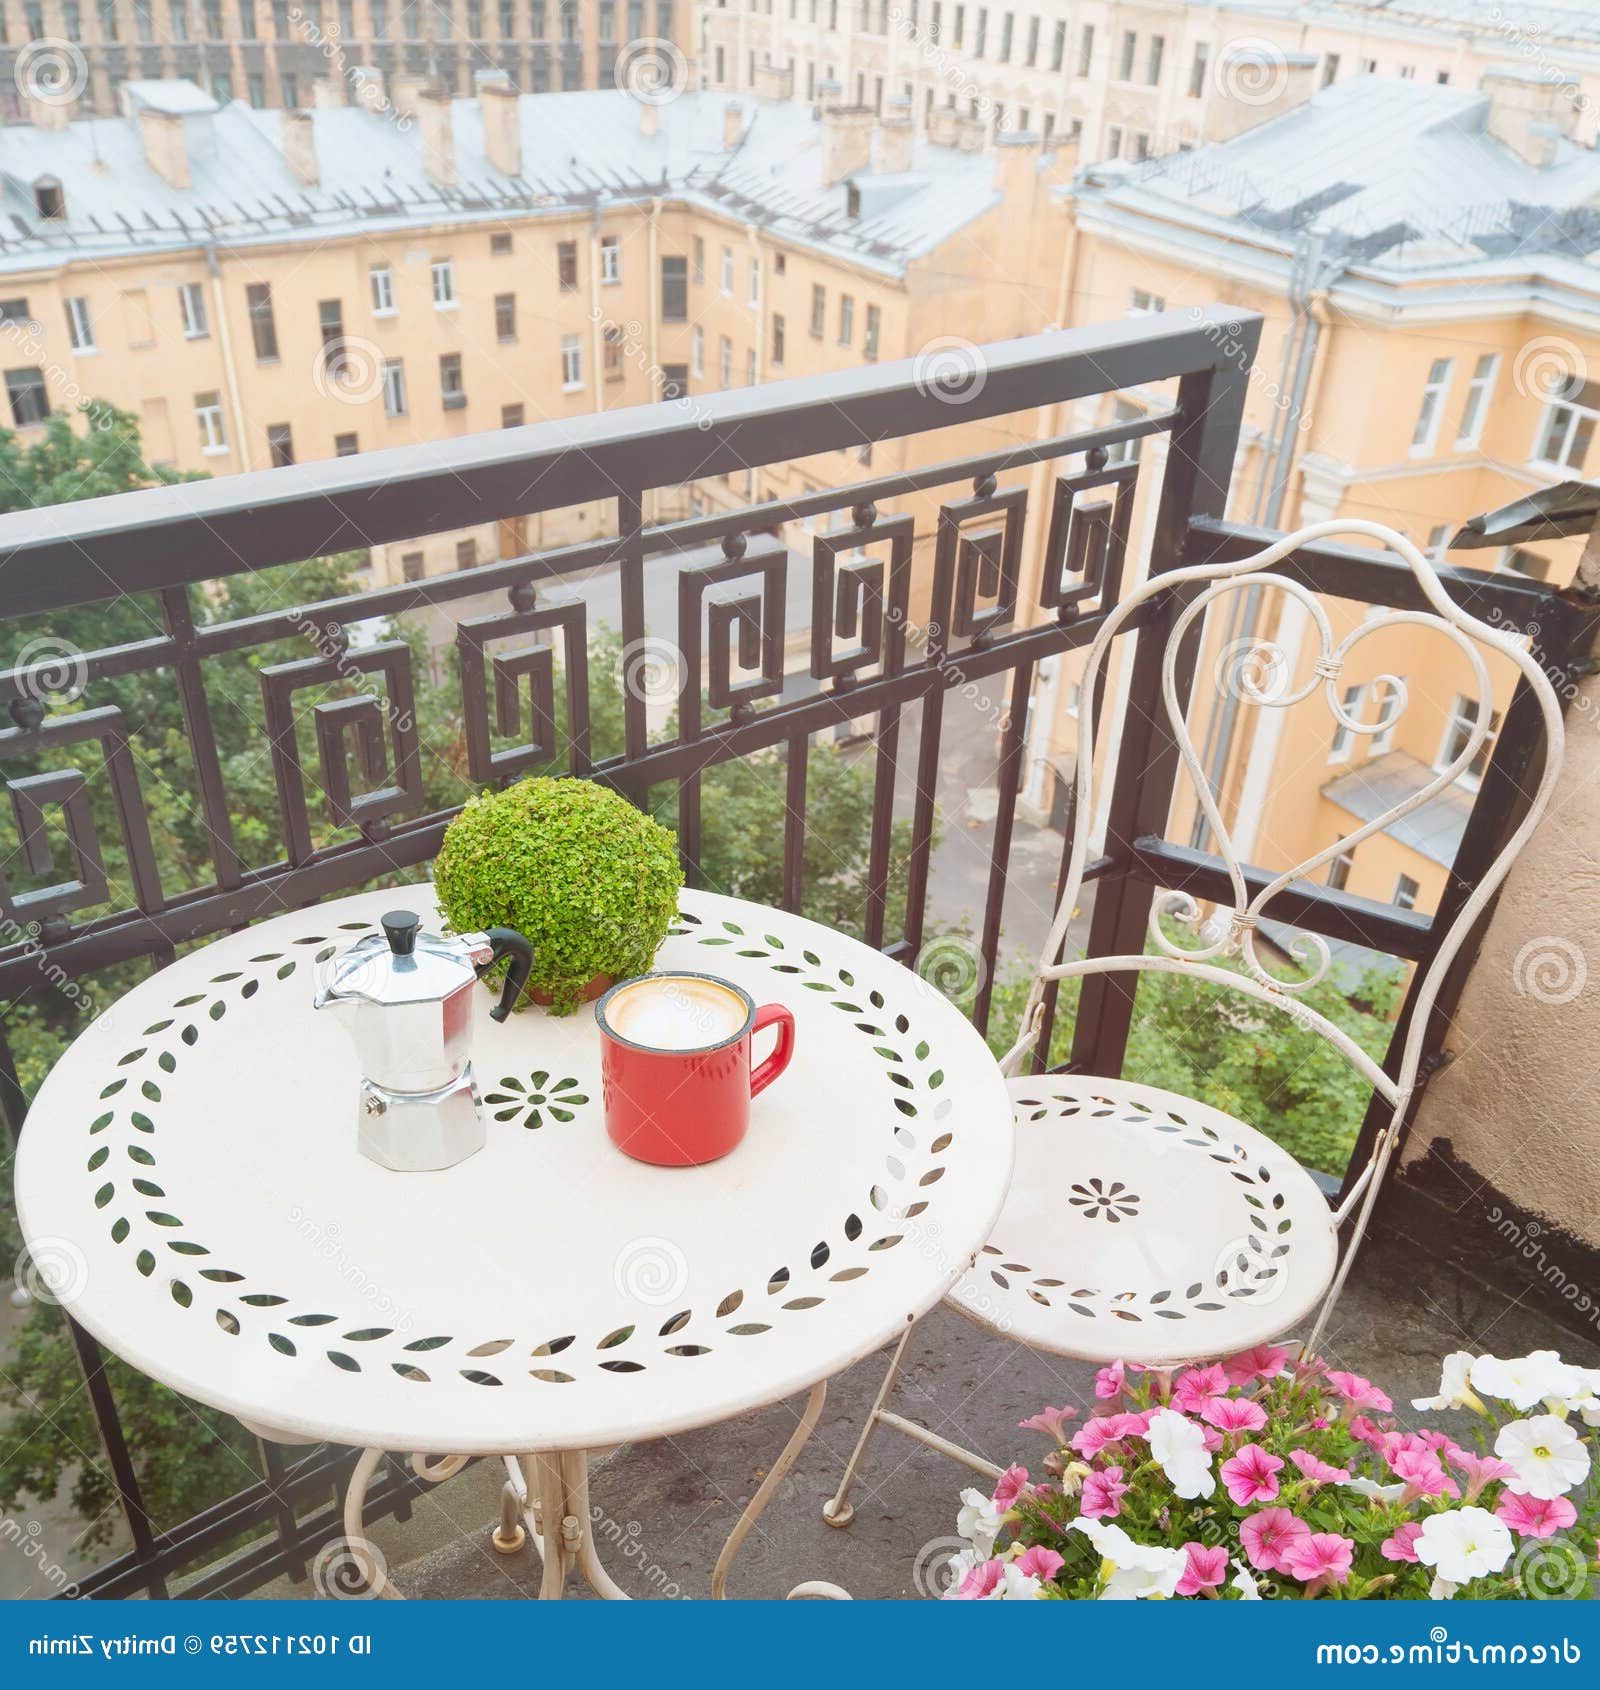 Coffee Tables For Balconies In 2020 Coffee Table With Chair On Balcony Stock Image – Image Of Table (View 5 of 15)